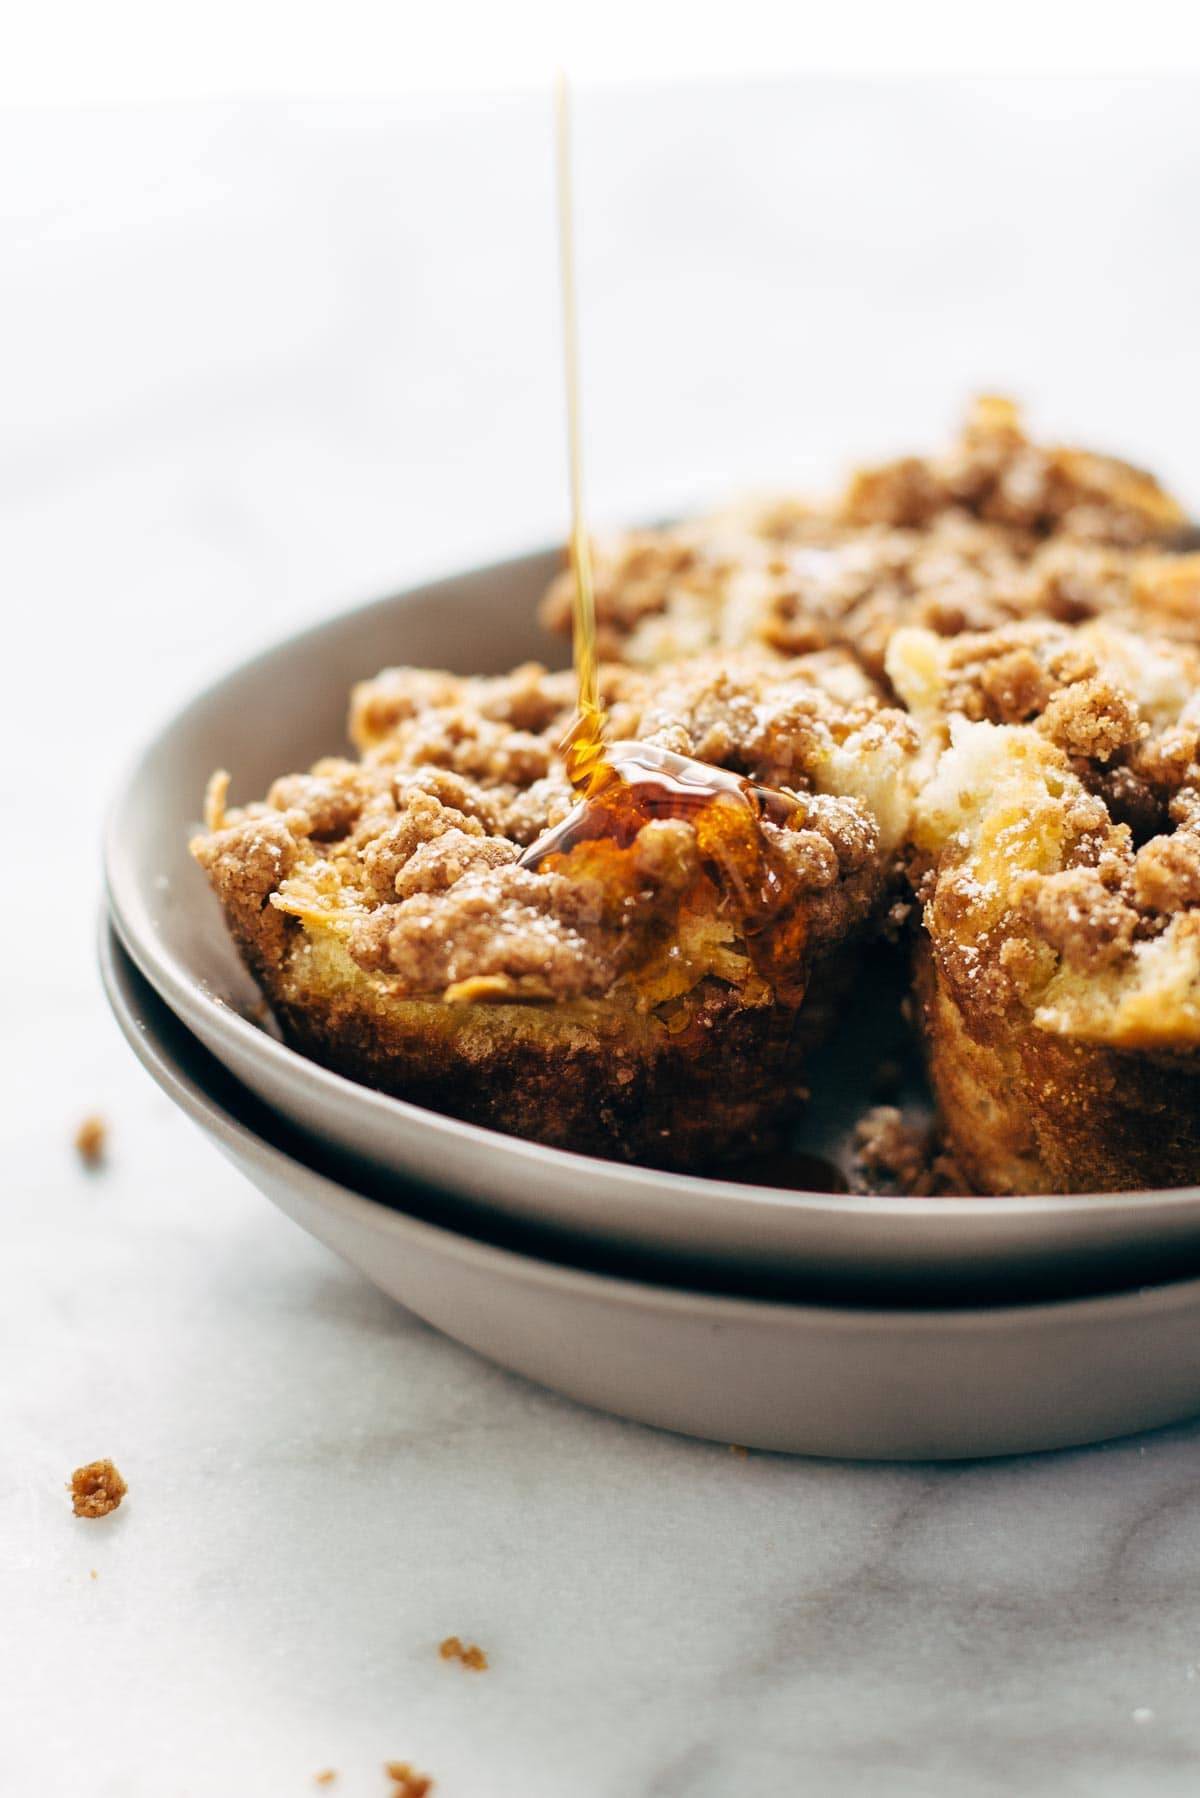 Cinnamon Streusel French Toast Cups - perfect little bites of French Toast for an easy brunch recipe! loaded to the brim with cinnamon streusel. SO good! | pinchofyum.com